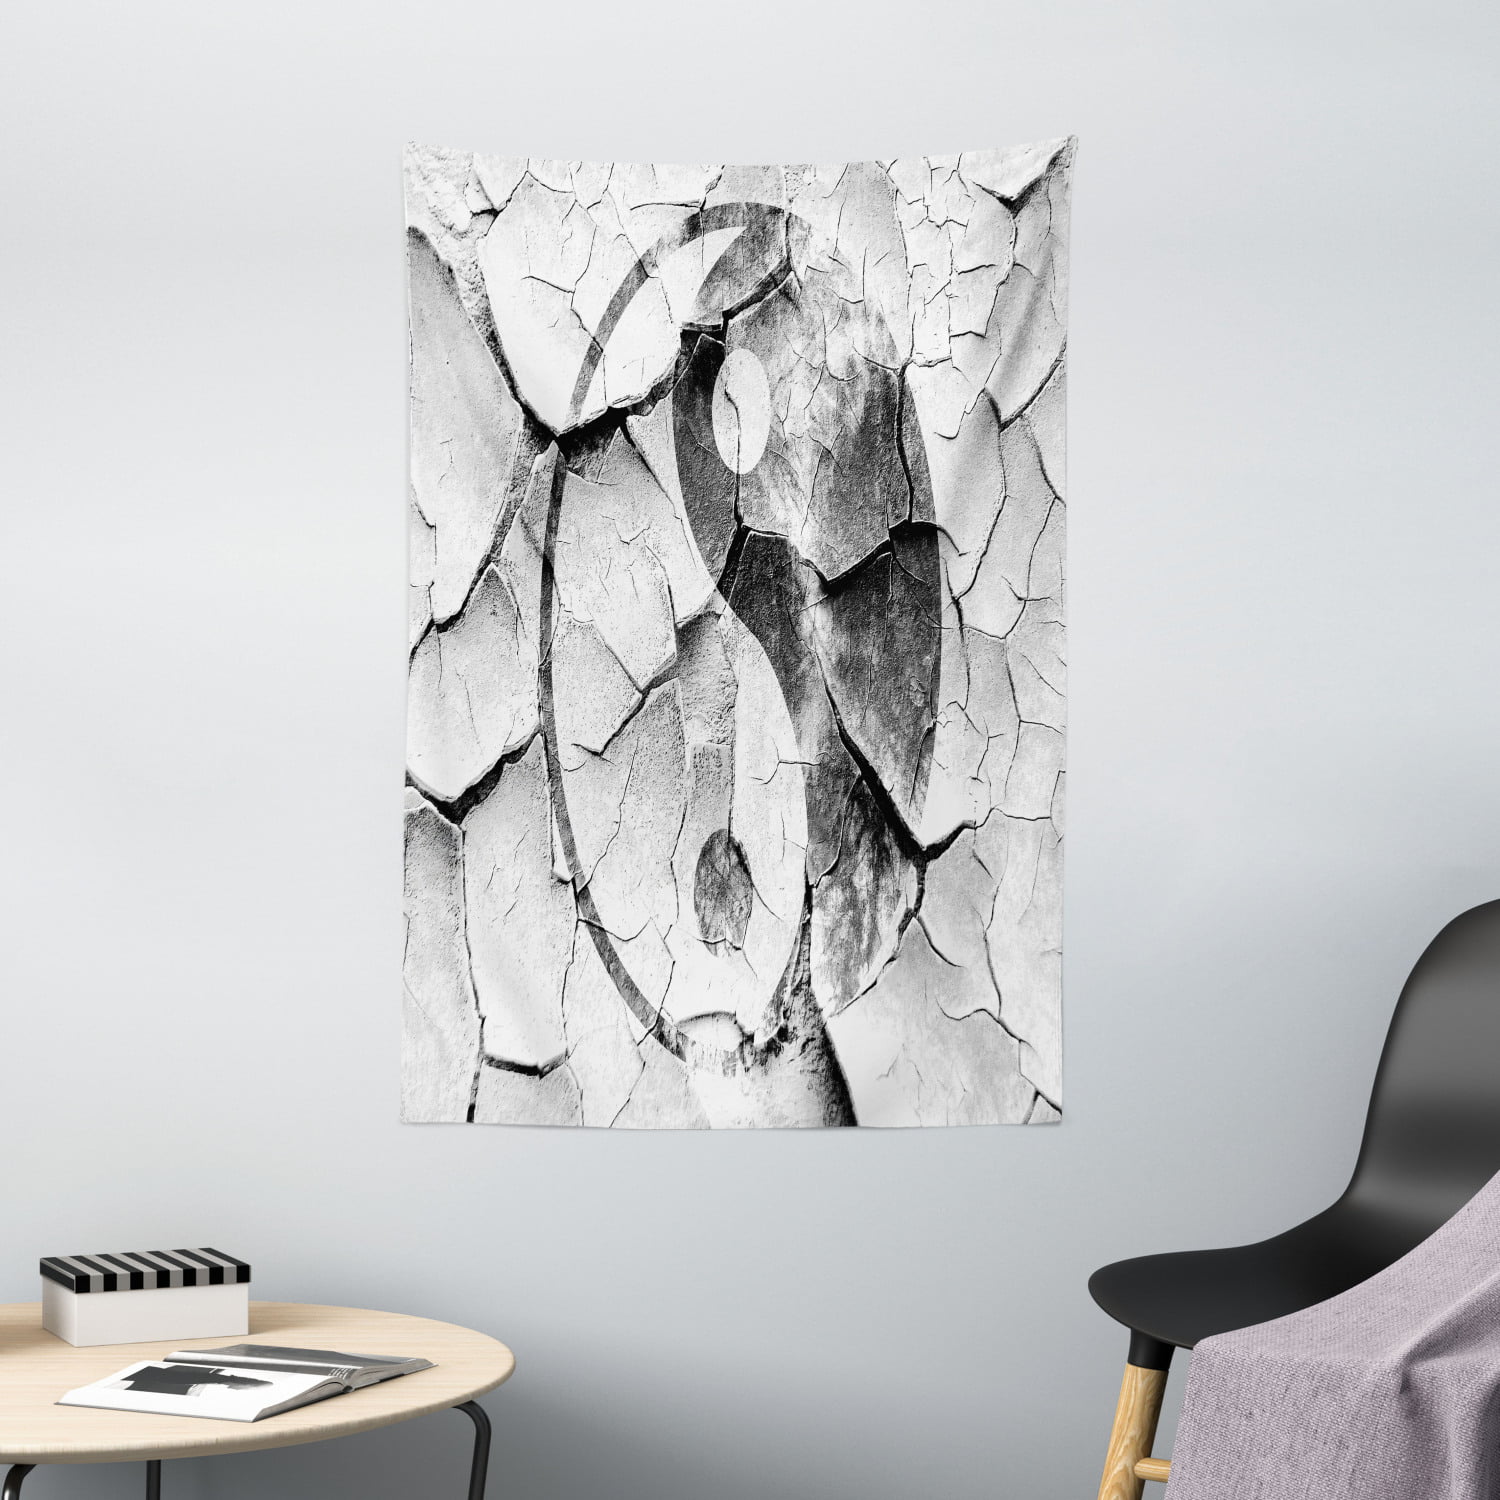 Ying Yang Tapestry, Grunge Cracked Yin Yang Sign on the Wall Graphic